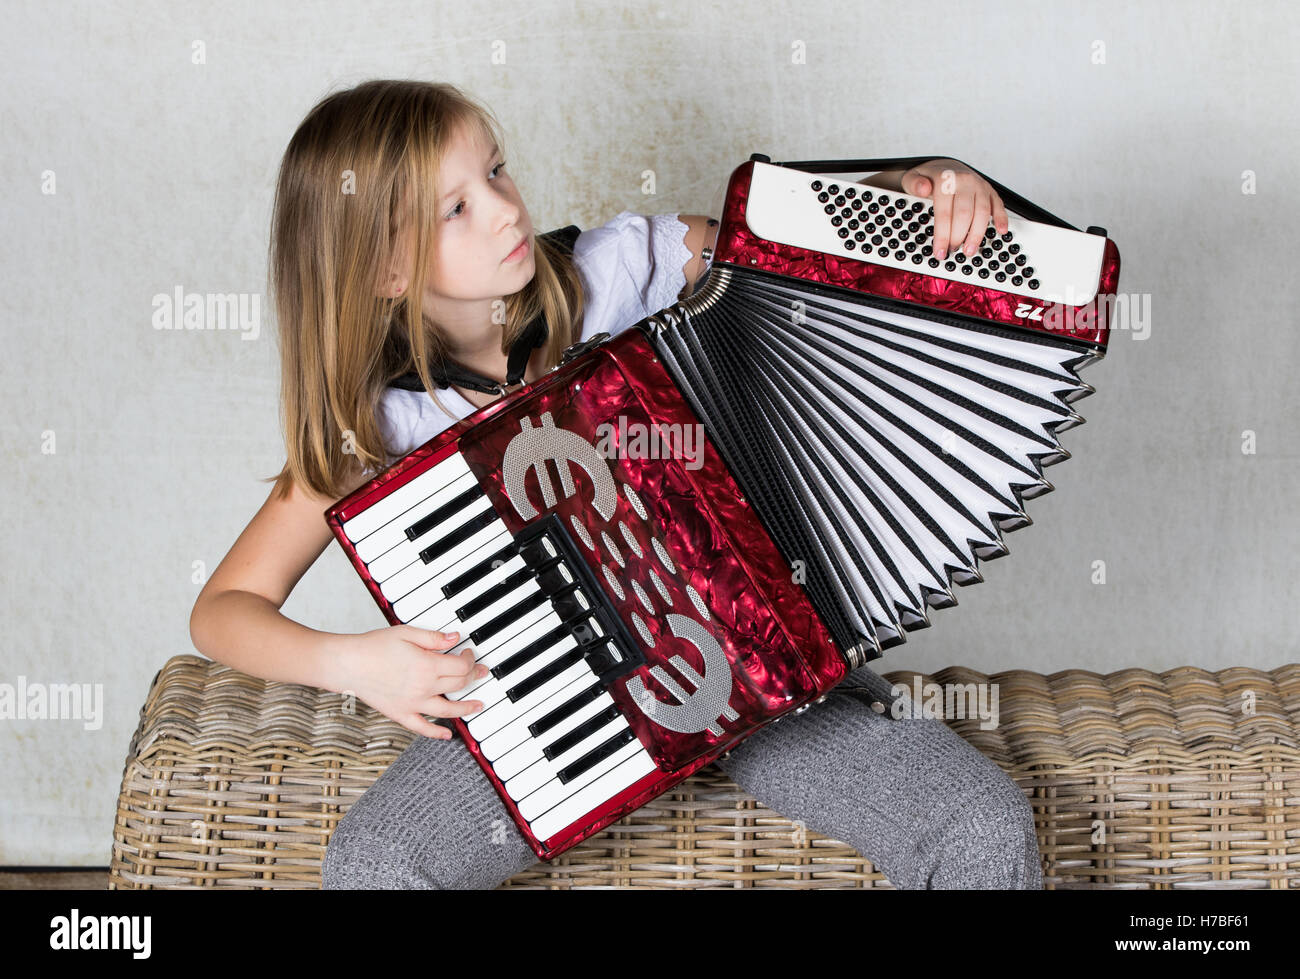 Accordionist concentration on playing her accordion Stock Photo